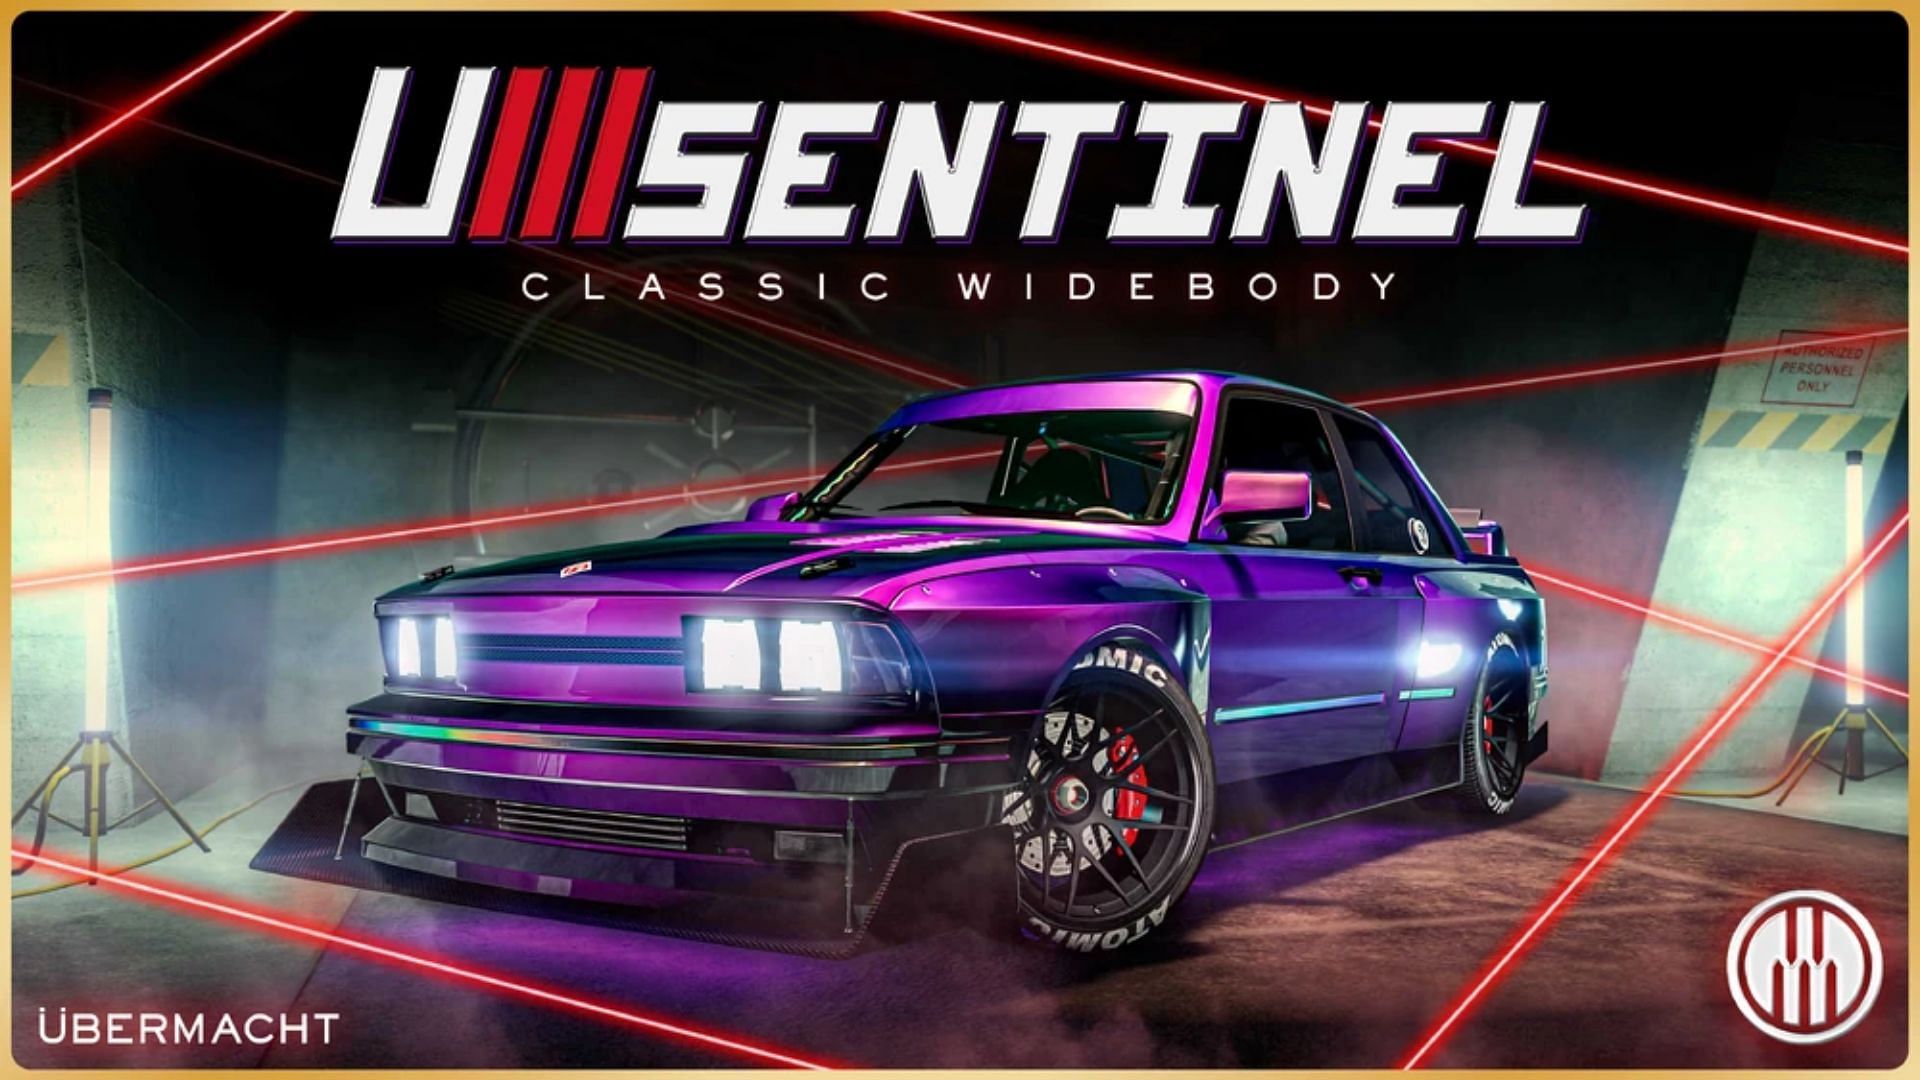 An image of the Sentinel Classic Widebody (Image via GTA Wiki)